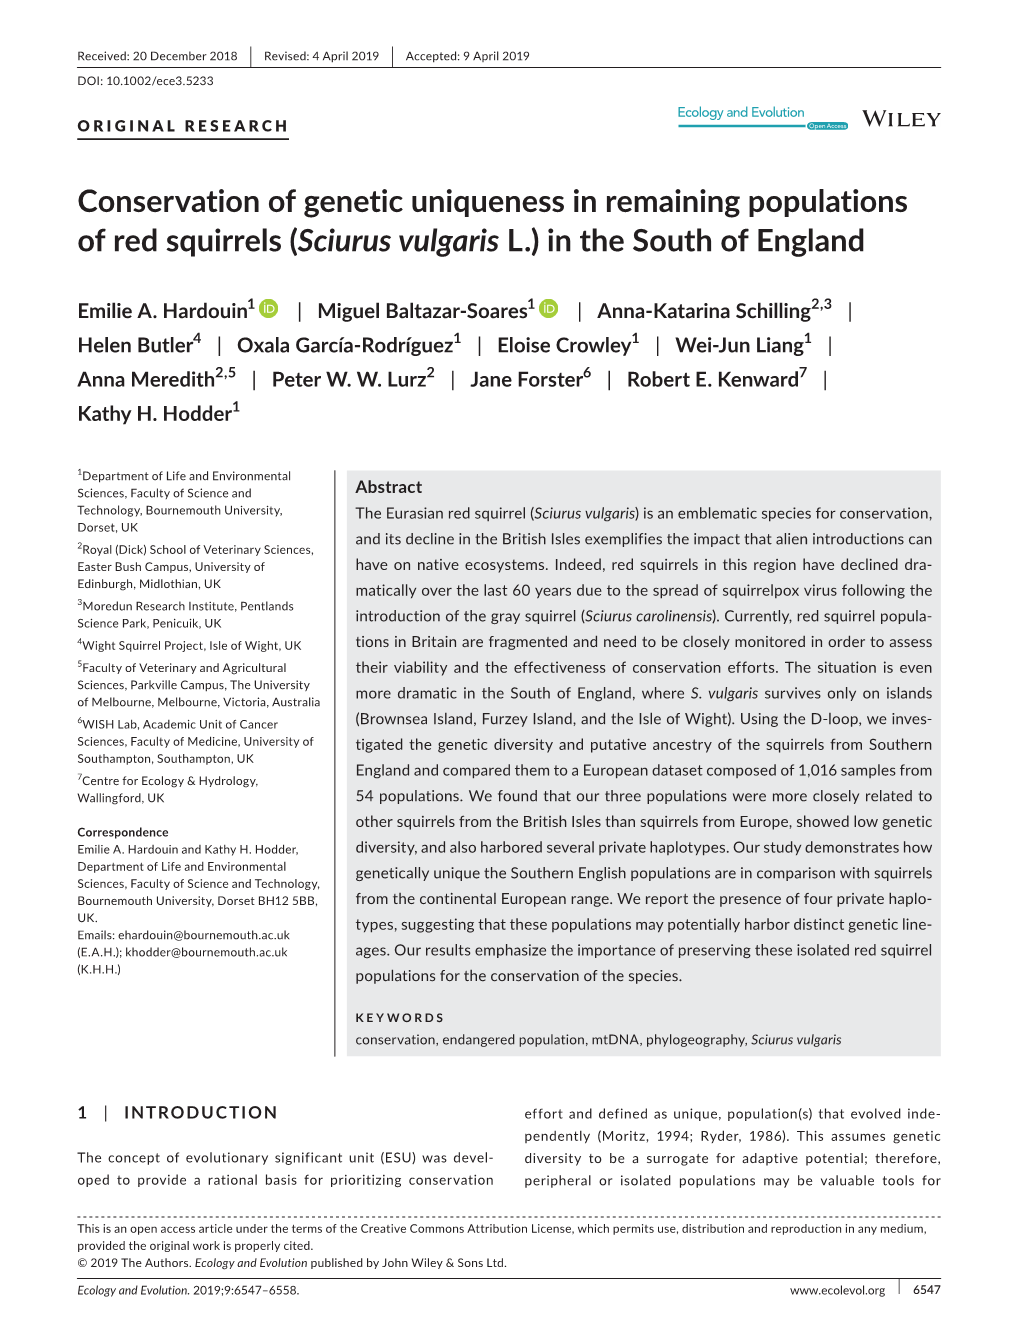 Conservation of Genetic Uniqueness in Remaining Populations of Red Squirrels (Sciurus Vulgaris L.) in the South of England